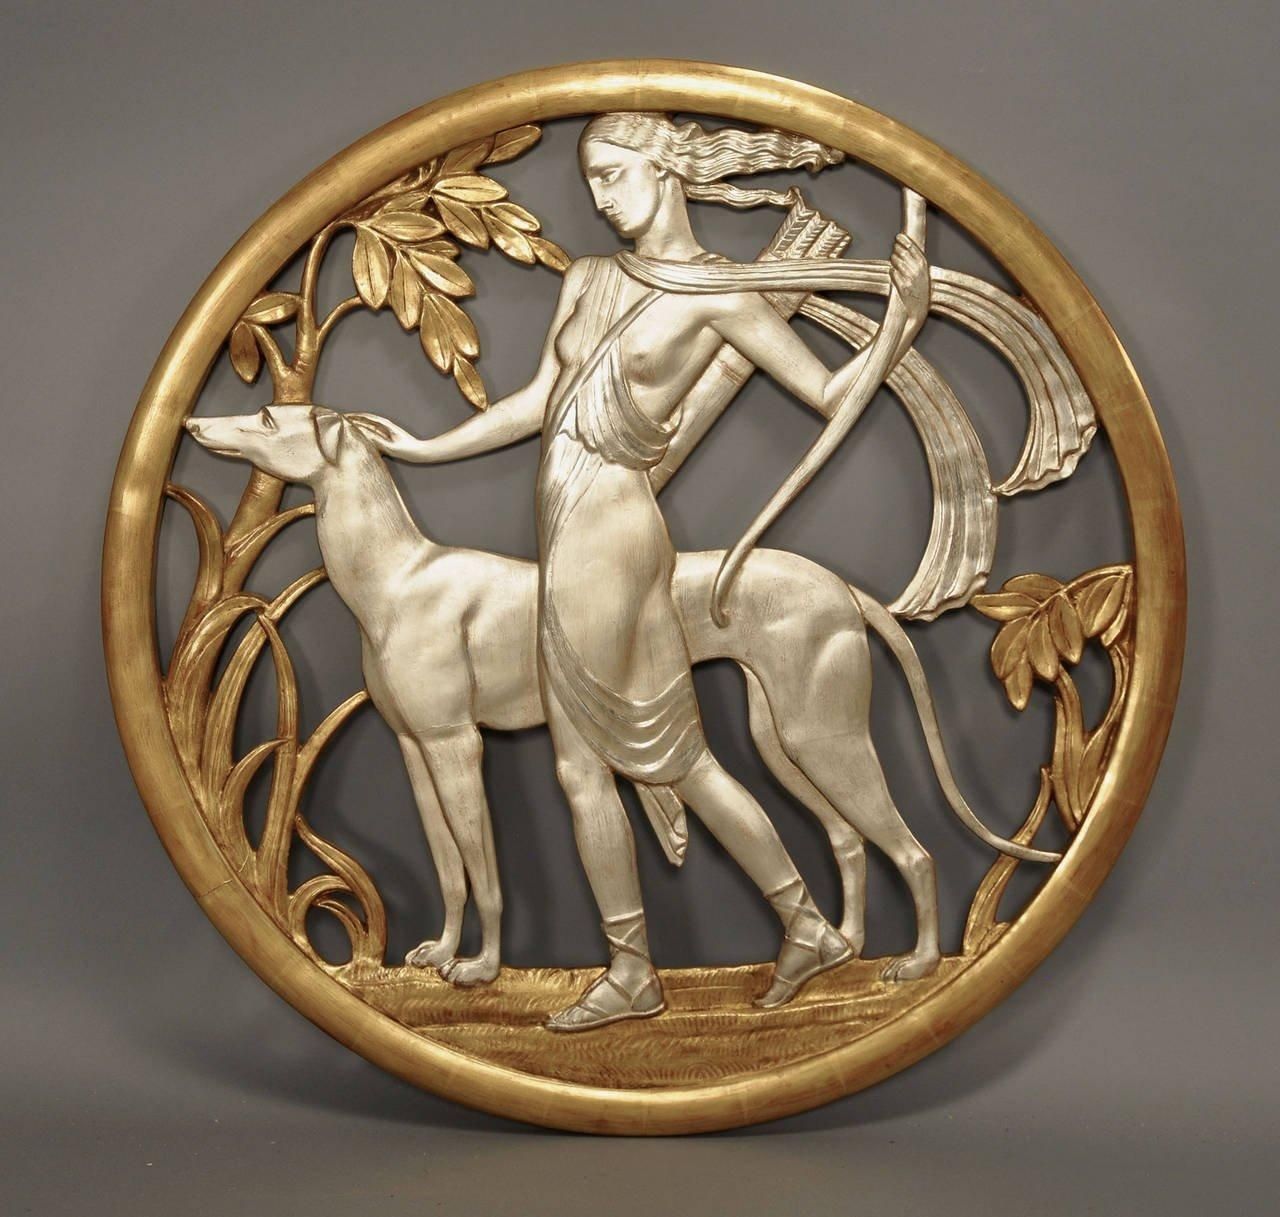 Important Art Deco Mythological Gilt Wall Plaque For Sale At 1stdibs Pertaining To Art Deco Metal Wall Art (View 19 of 20)